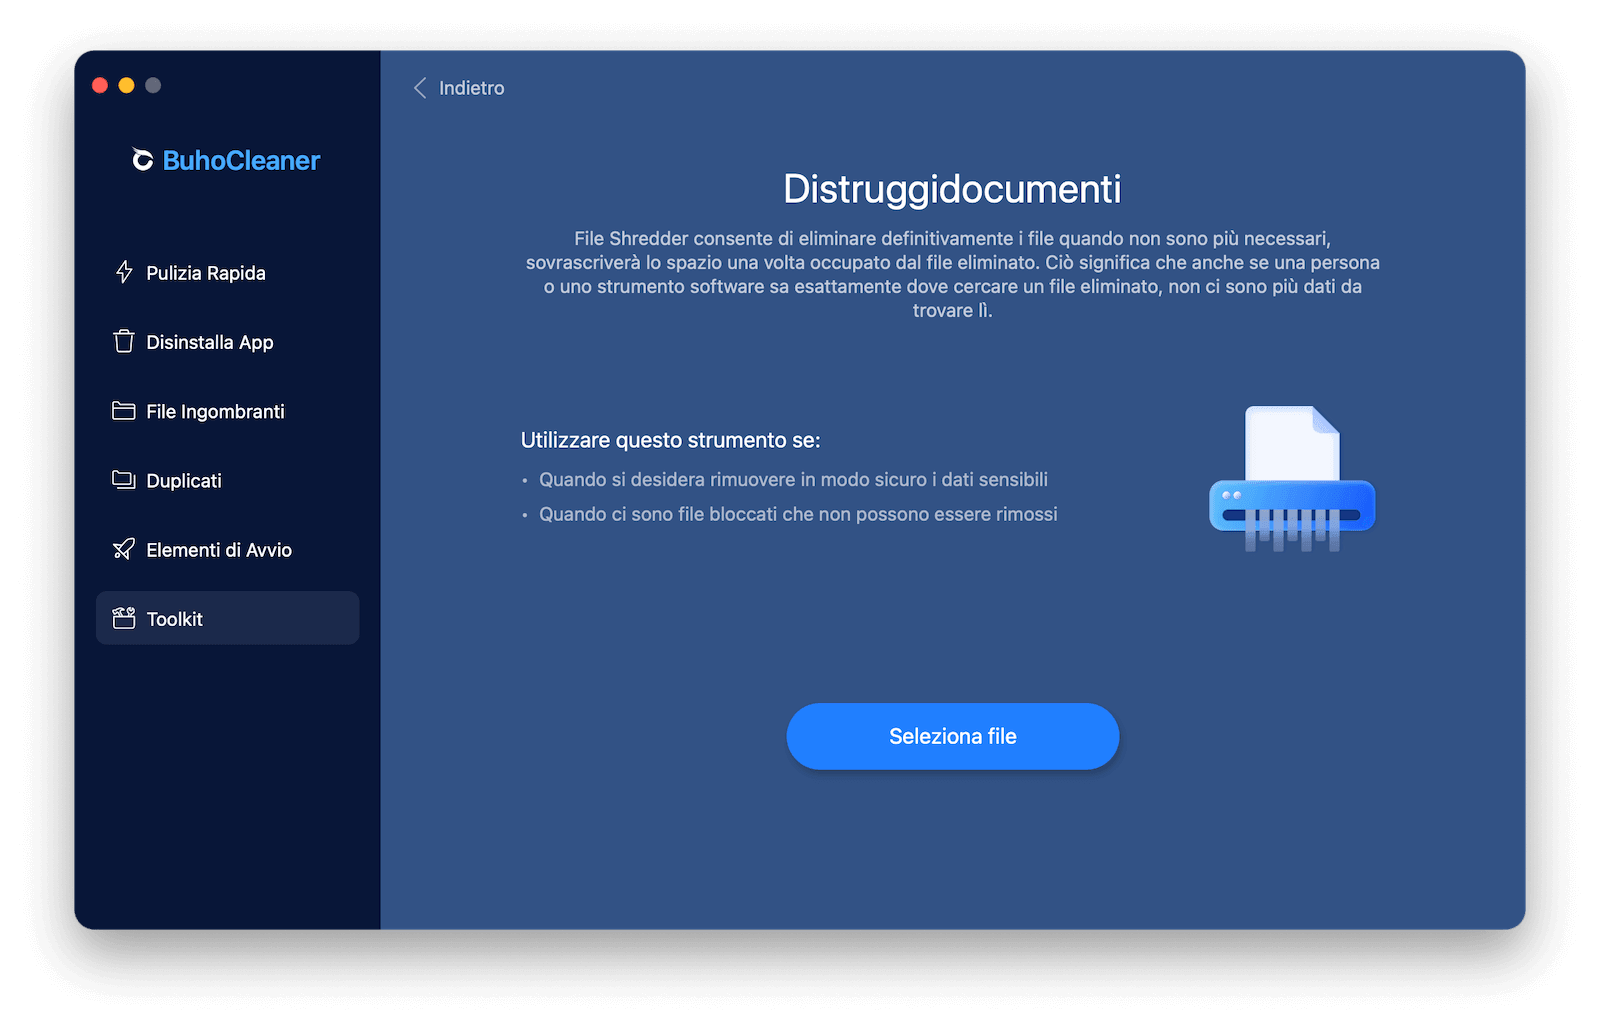 Quickly Delete Files on Mac with BuhoCleaner